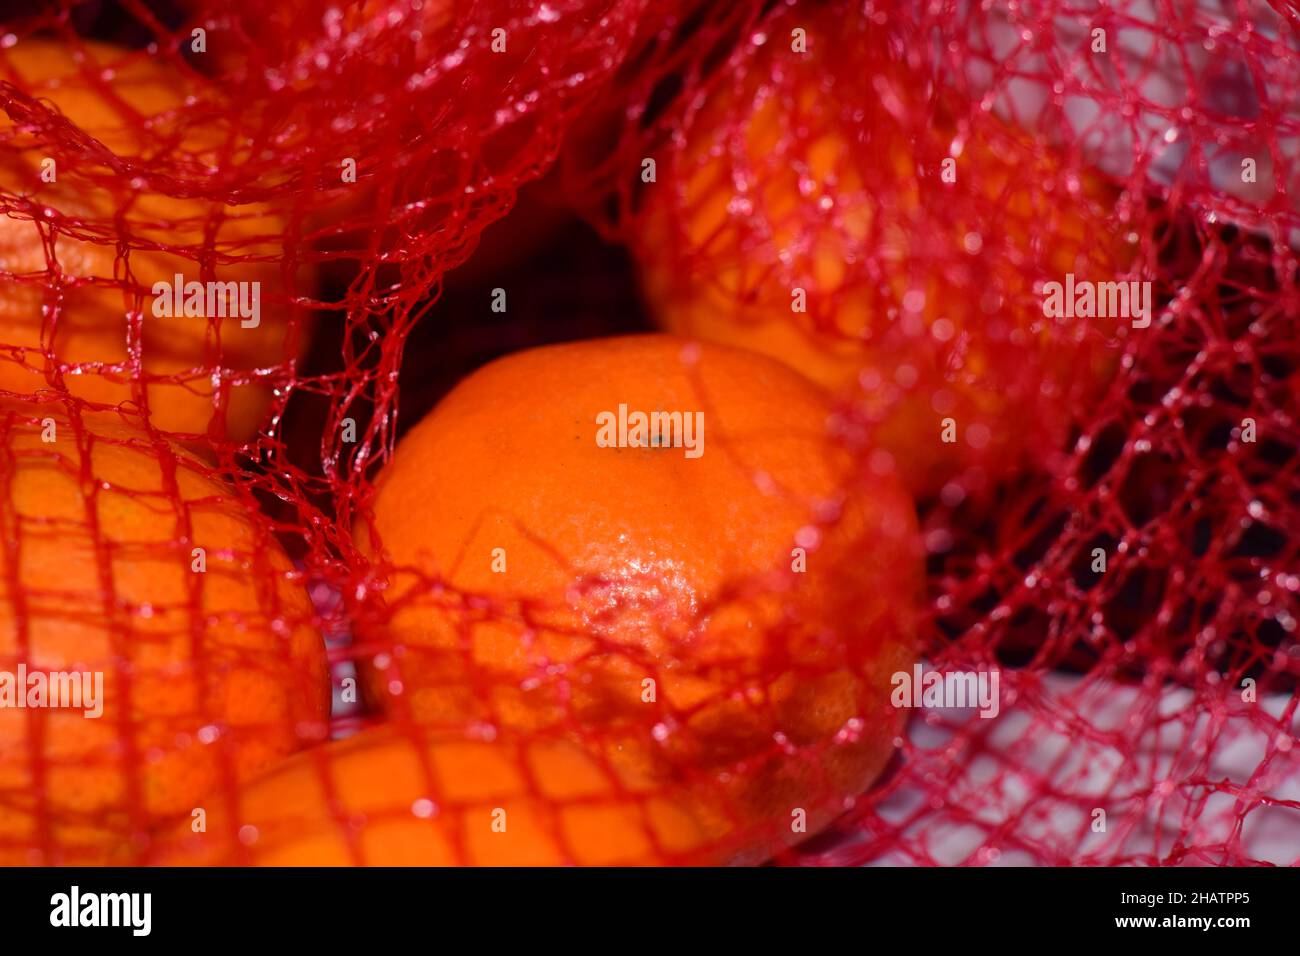 Mandarins in a red net as a close up Stock Photo